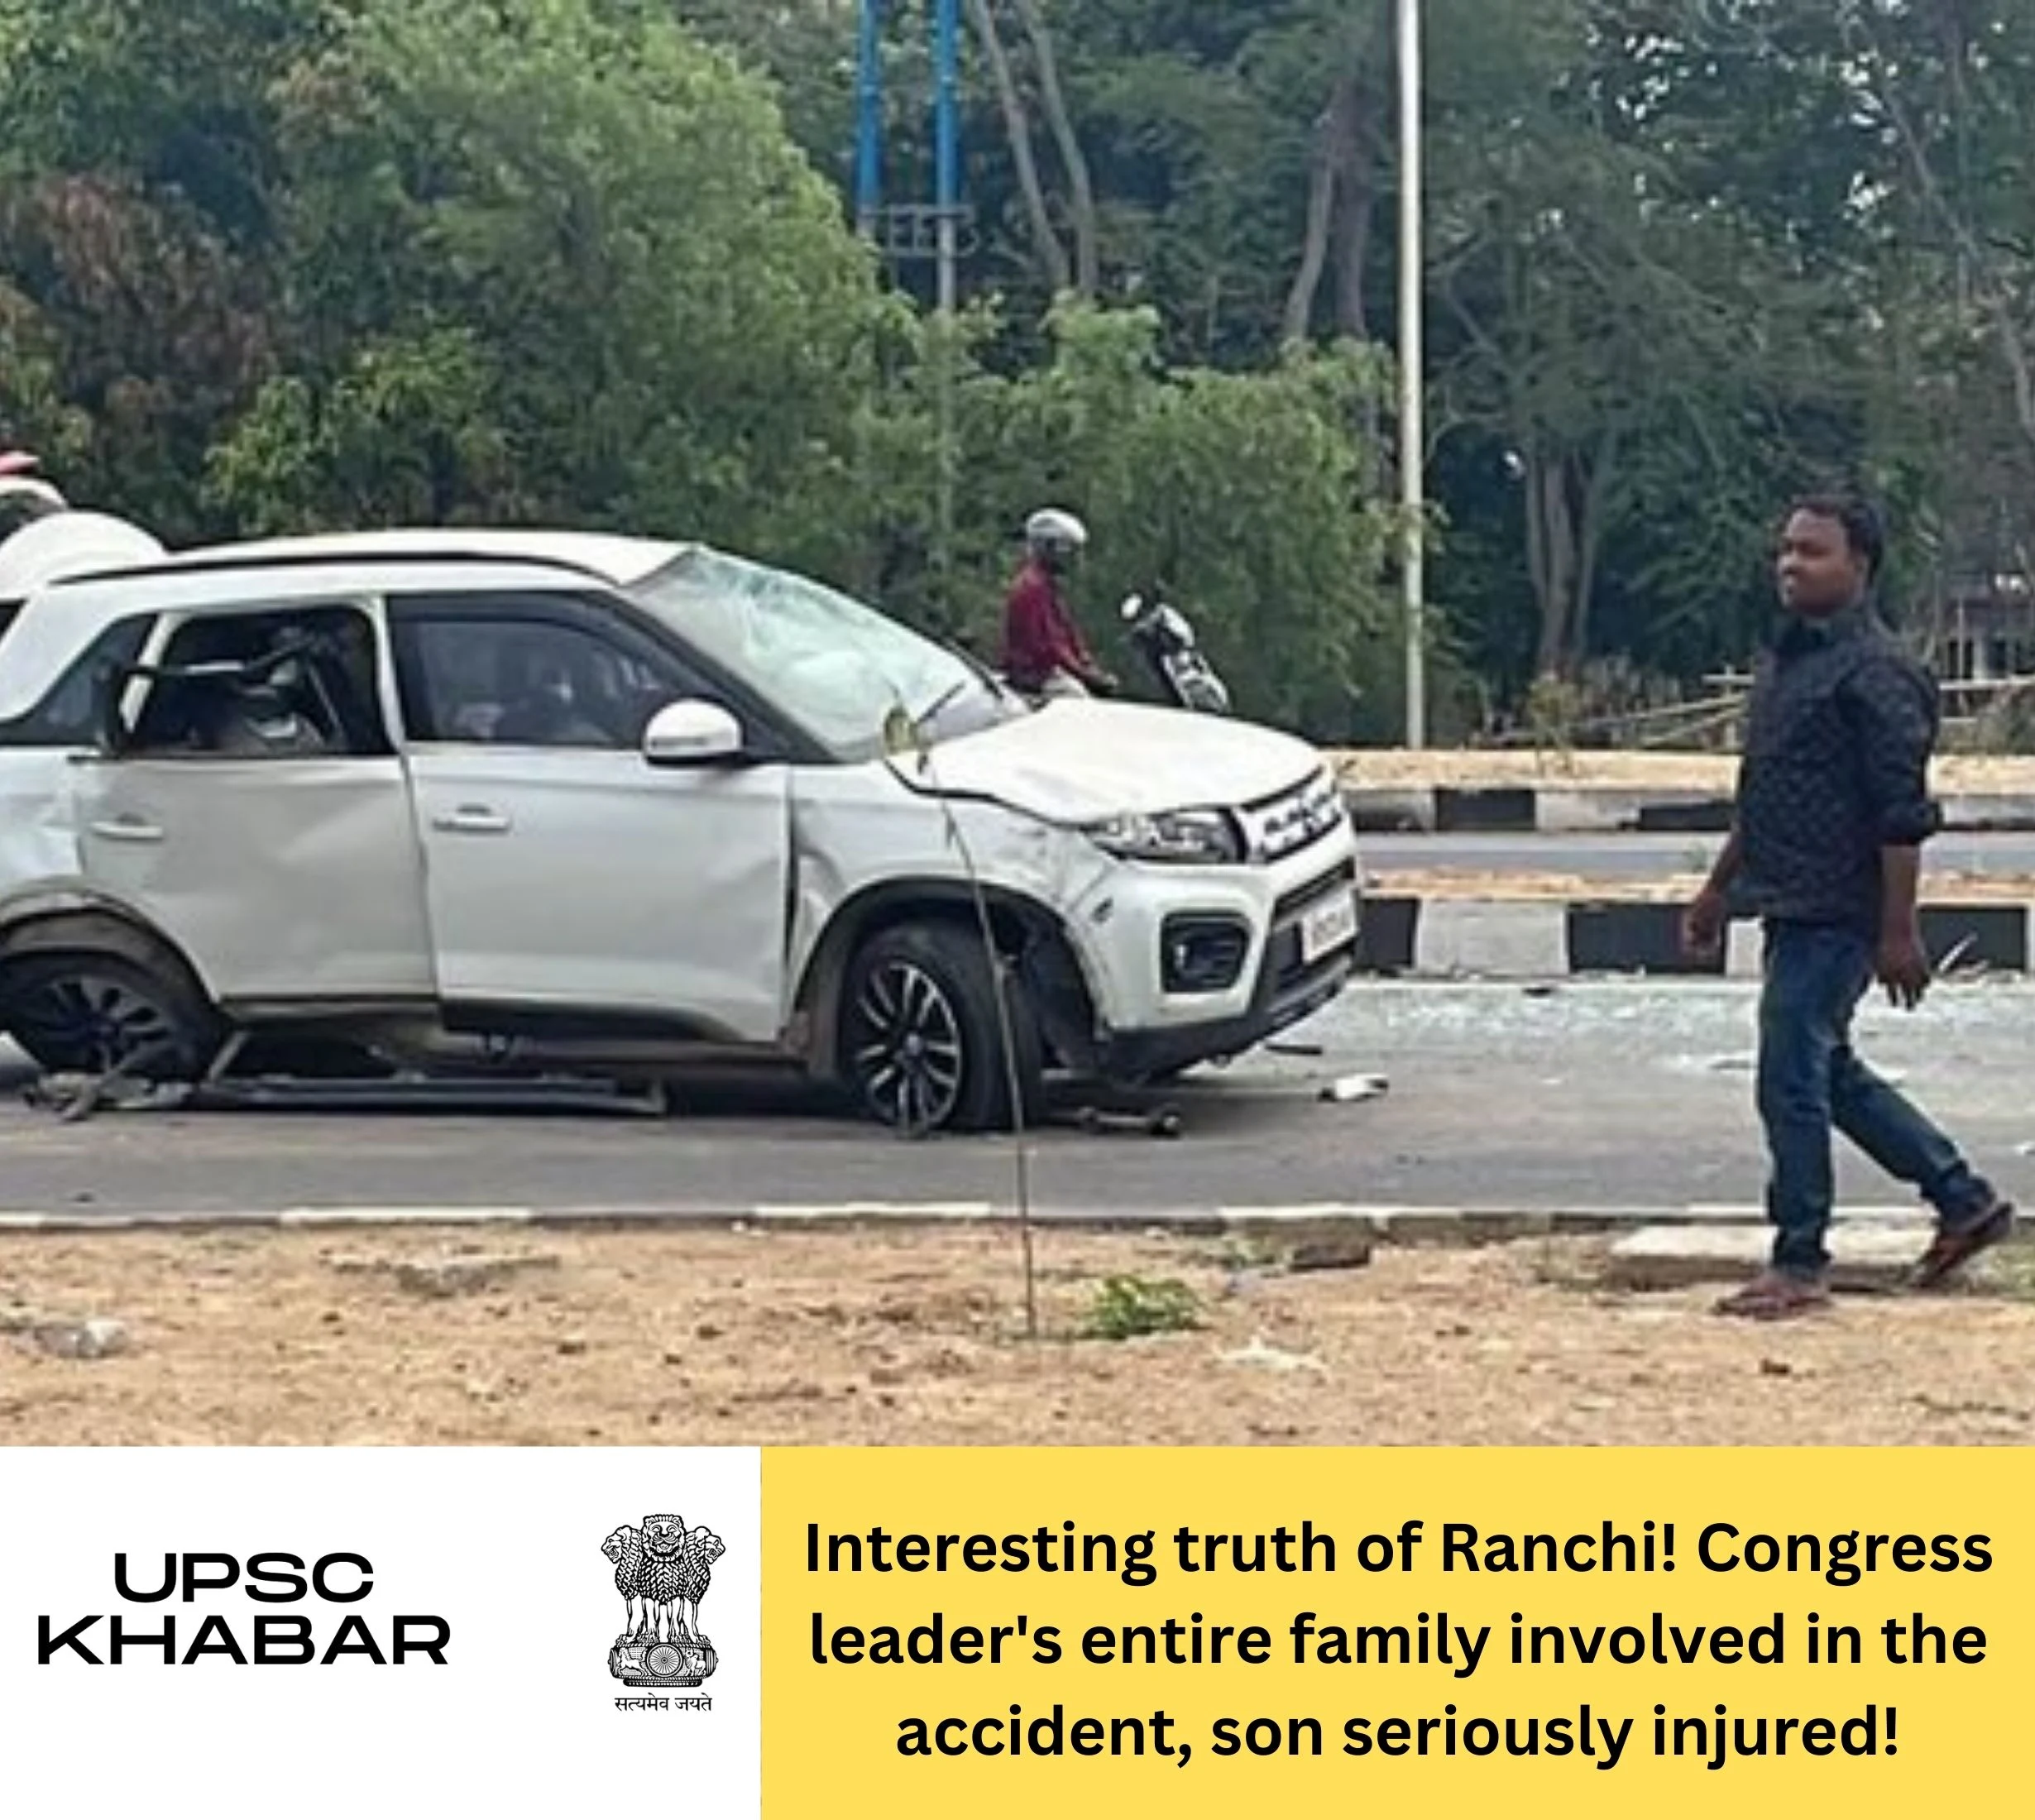 Interesting truth of Ranchi! Congress leader's entire family involved in the accident, son seriously injured!